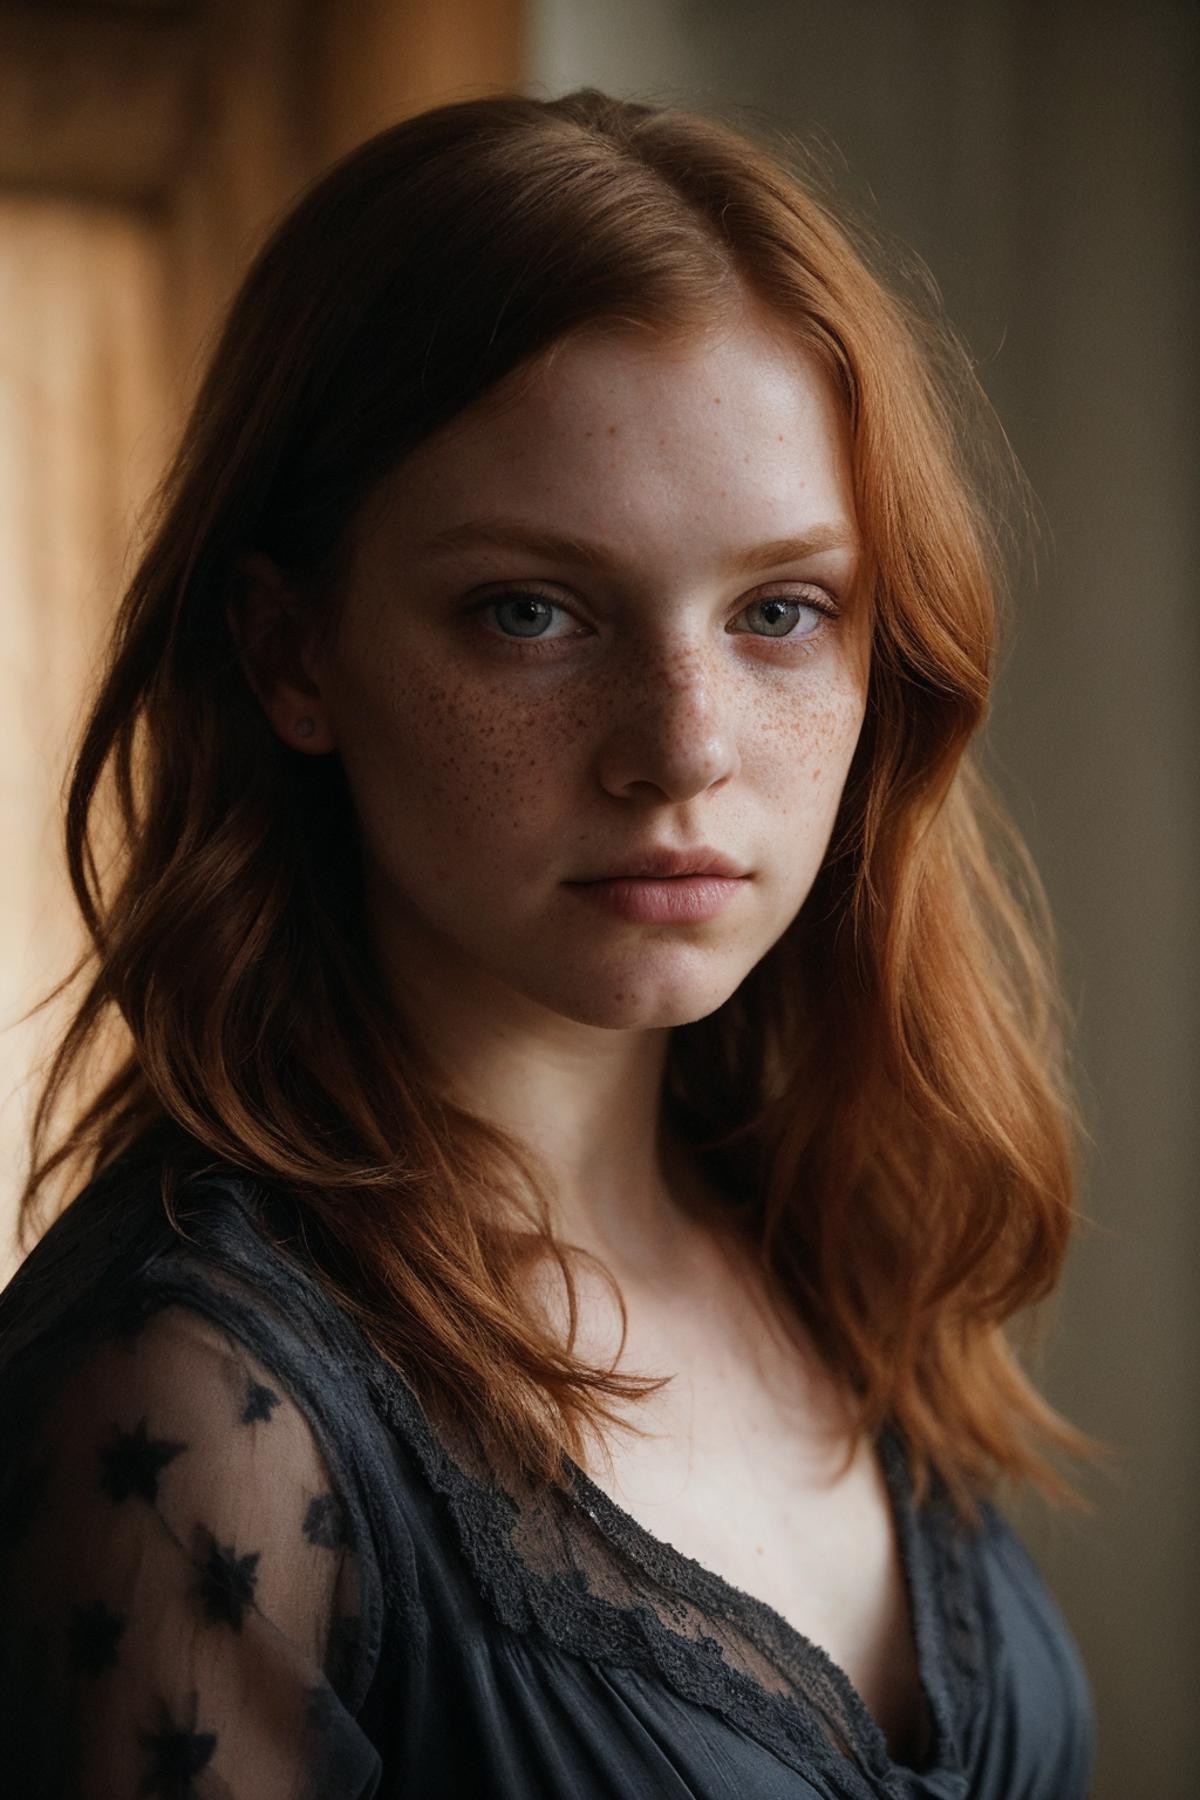 A close-up of a woman with freckles and red hair wearing a black shirt.